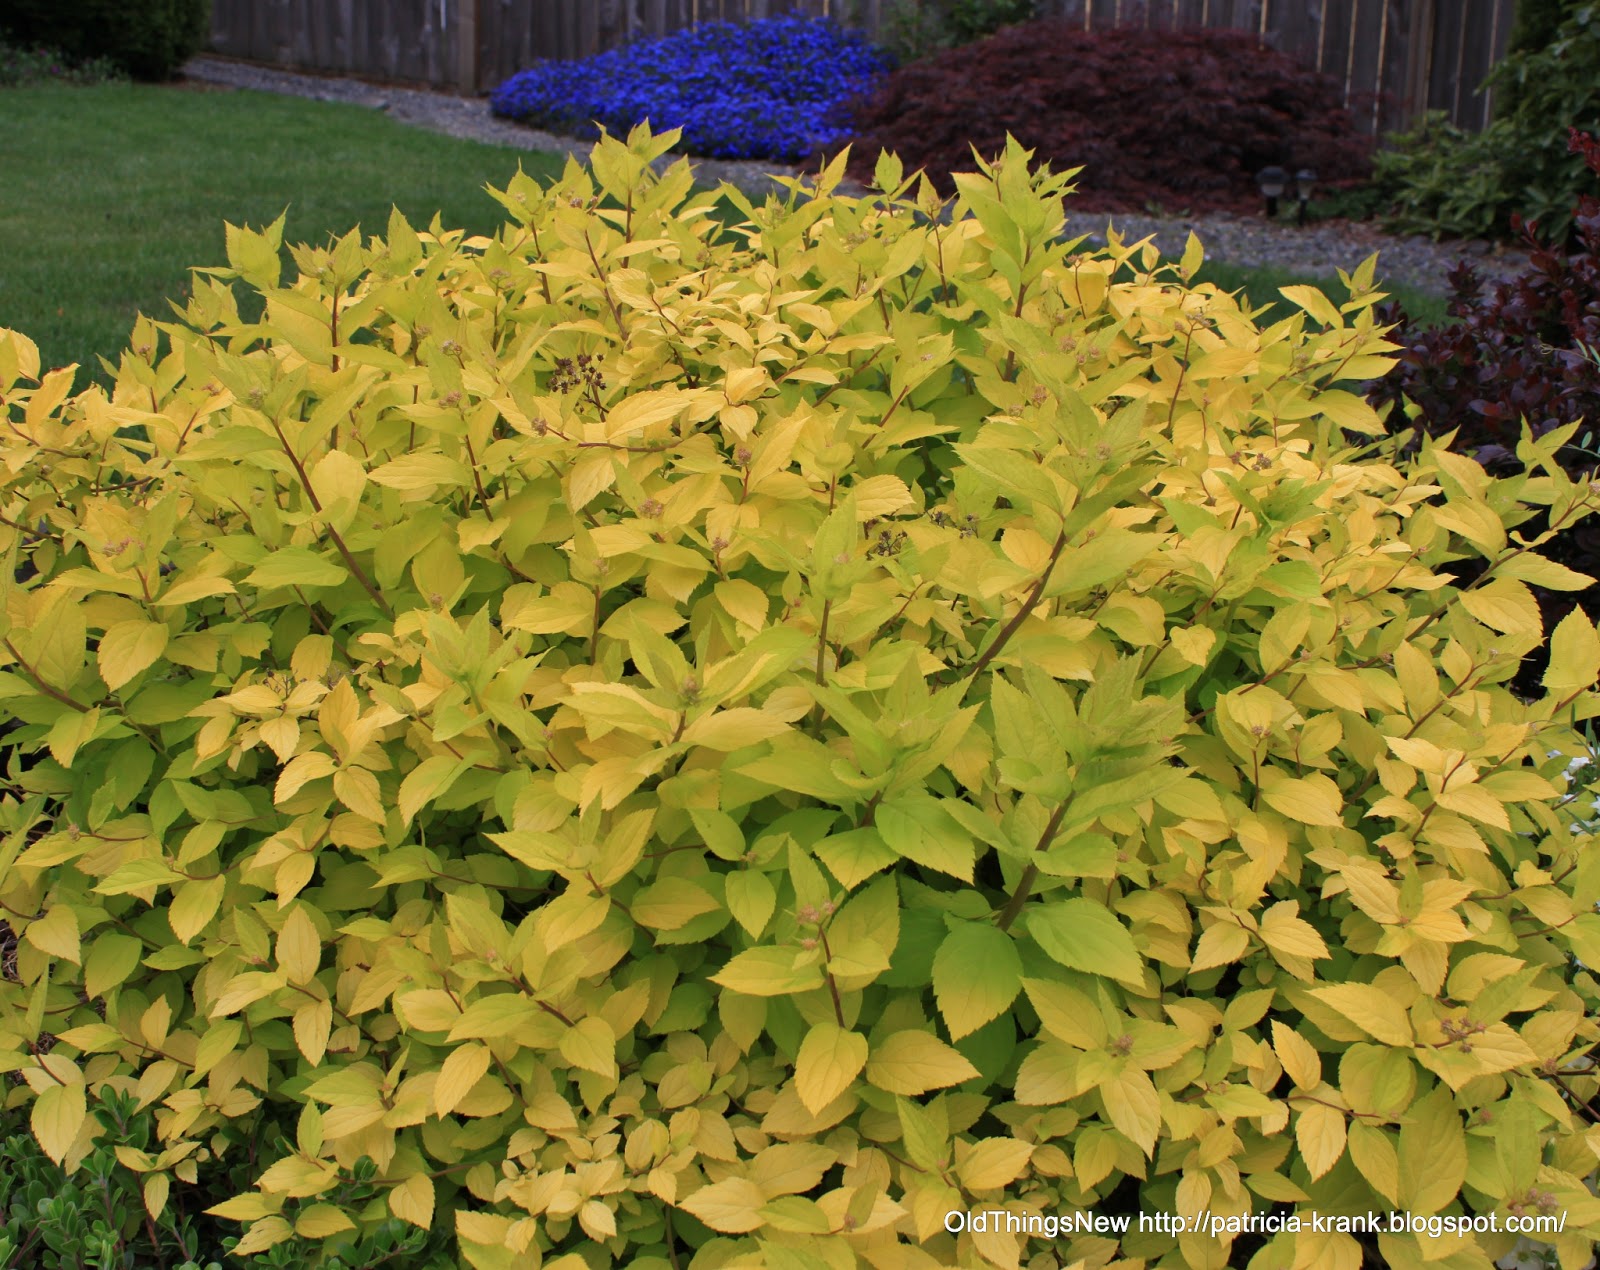 Snappy S Gardens Blog Mystery Roadside Shrub With Yellow Flowers